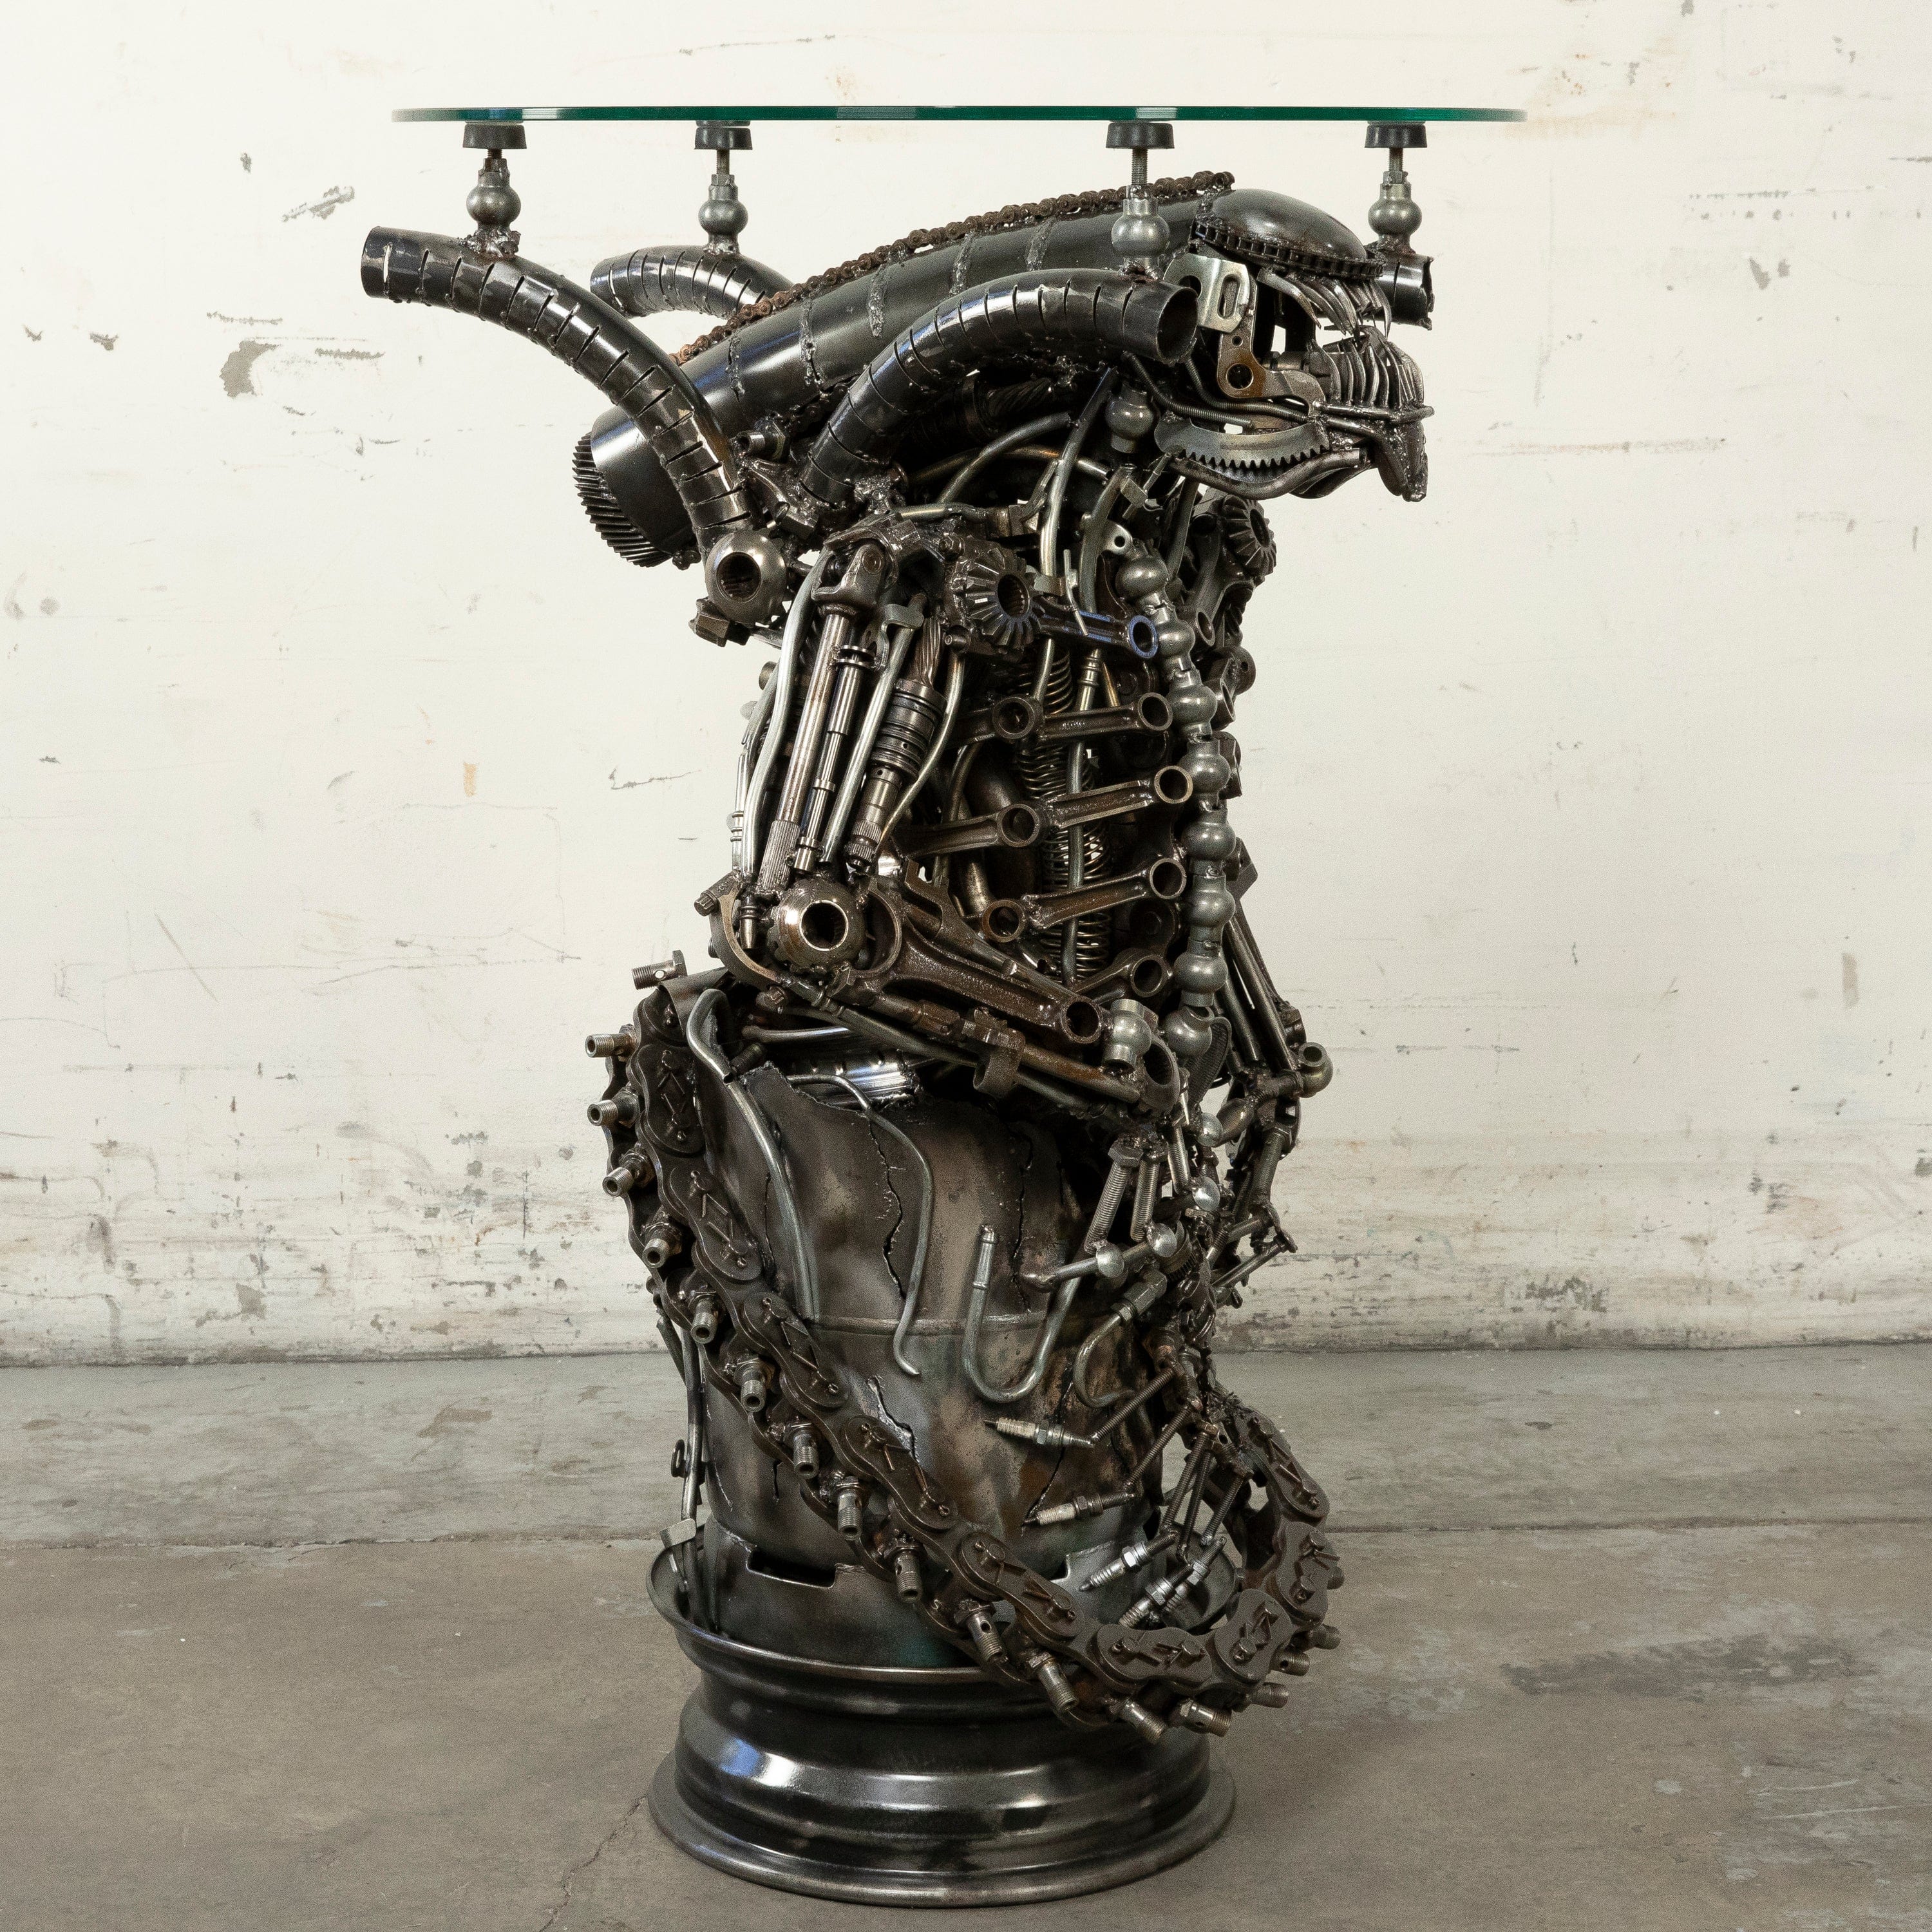 Kalifano Recycled Metal Art 36" Alien Inspired Recycled Metal Sculpture Table RMS-ATAB90-S02